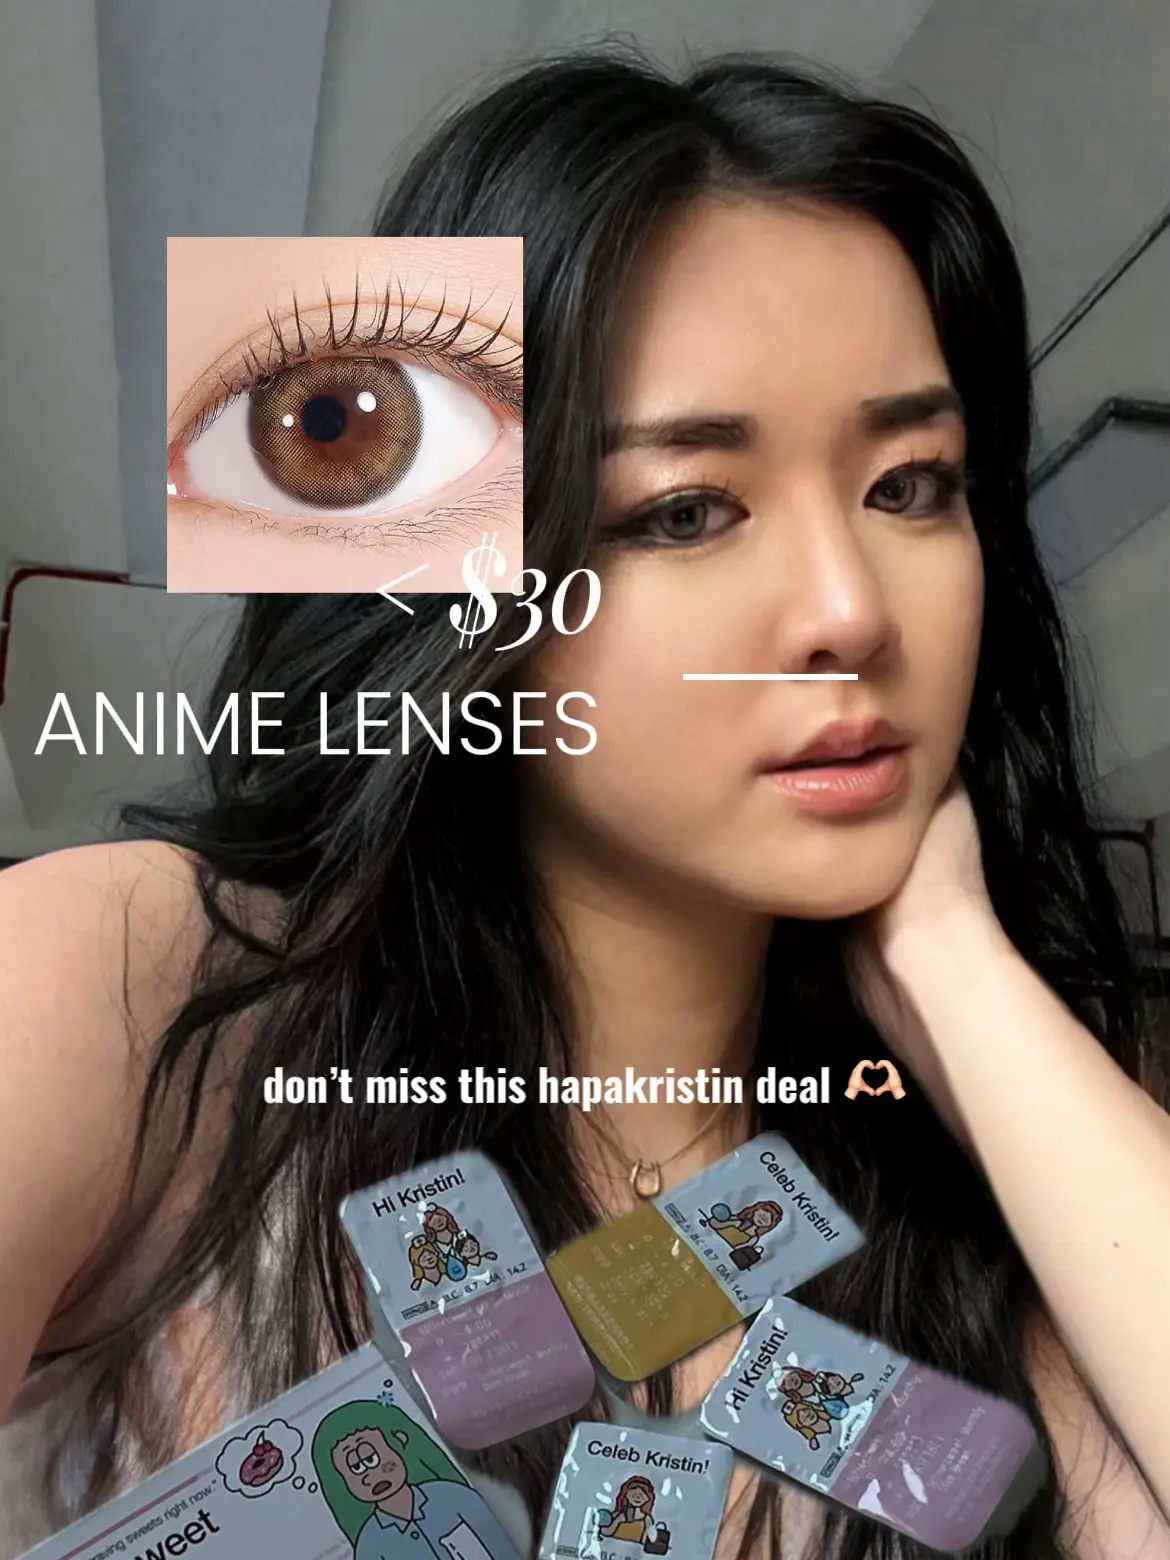 KAWAII ANIME LENSES FOR <$30 🍬🤍🎂, Gallery posted by Alyssa Johnson